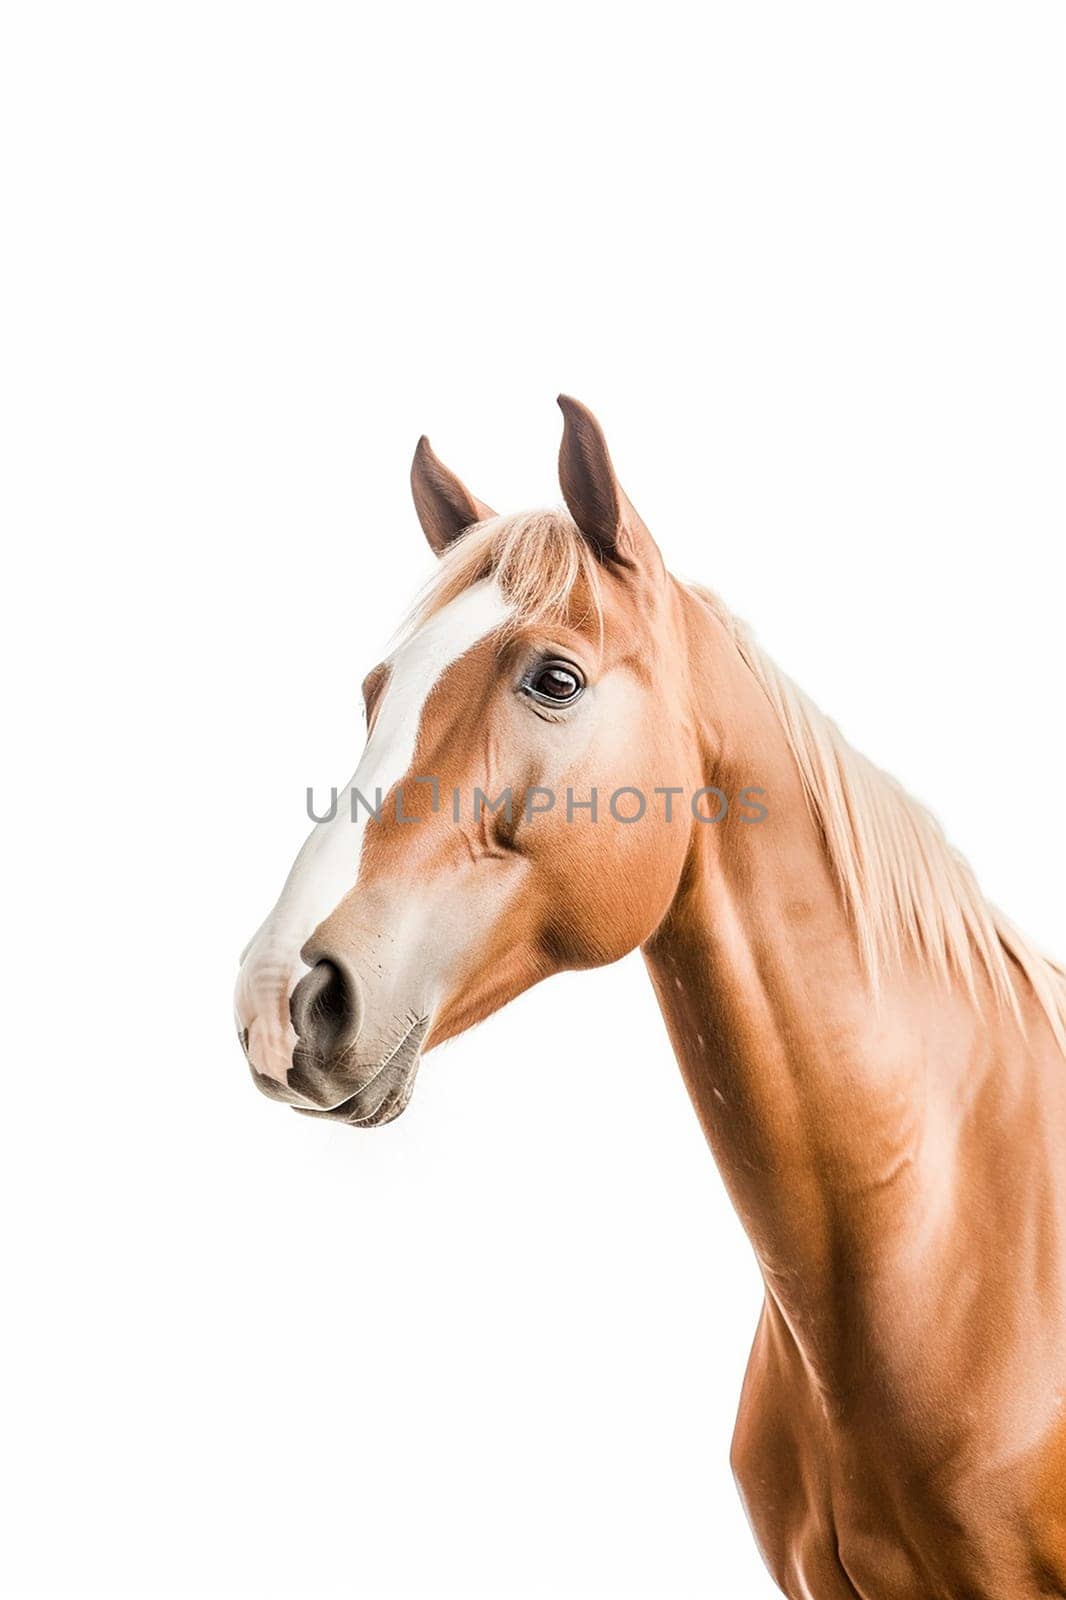 A beautiful brown horse photo, white background